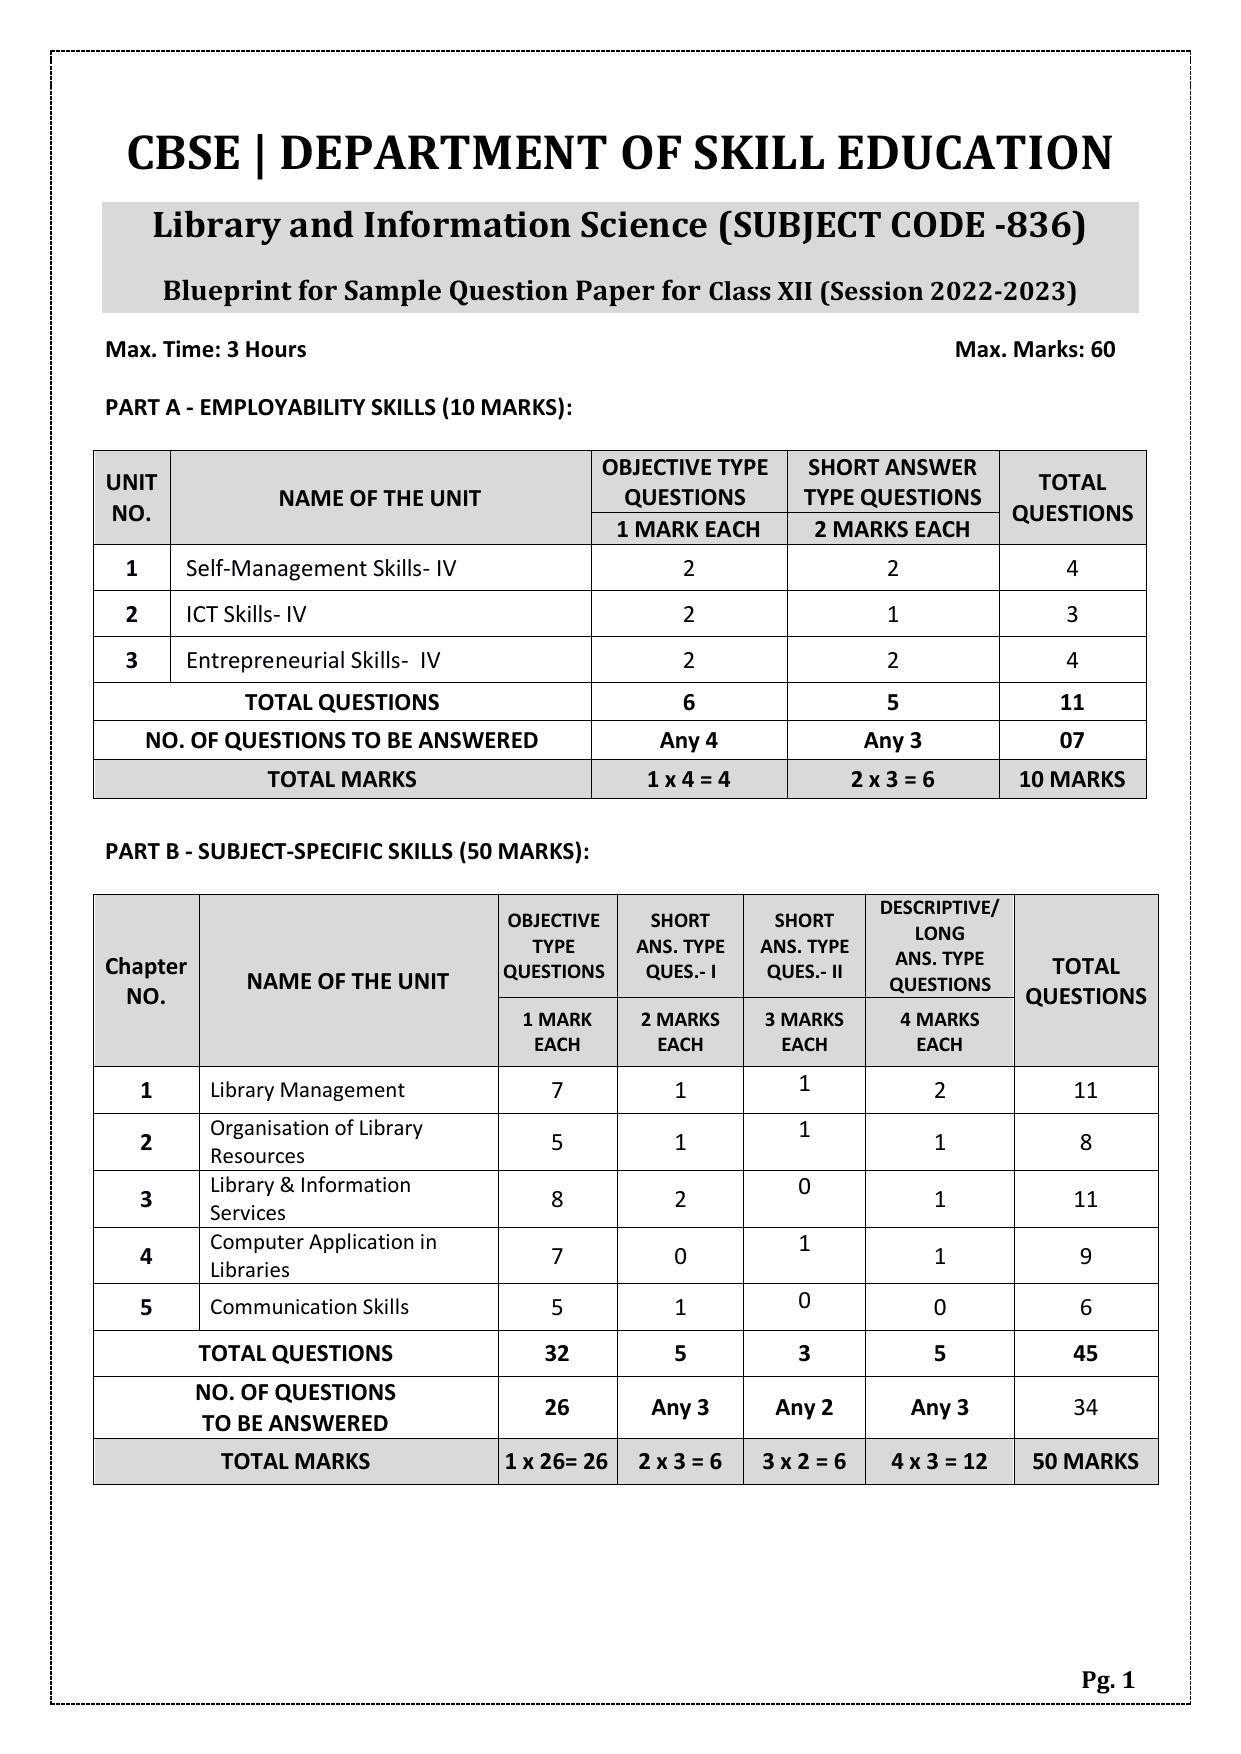 CBSE Class 12 Library & Information Science (Skill Education) Sample Papers 2023 - Page 1